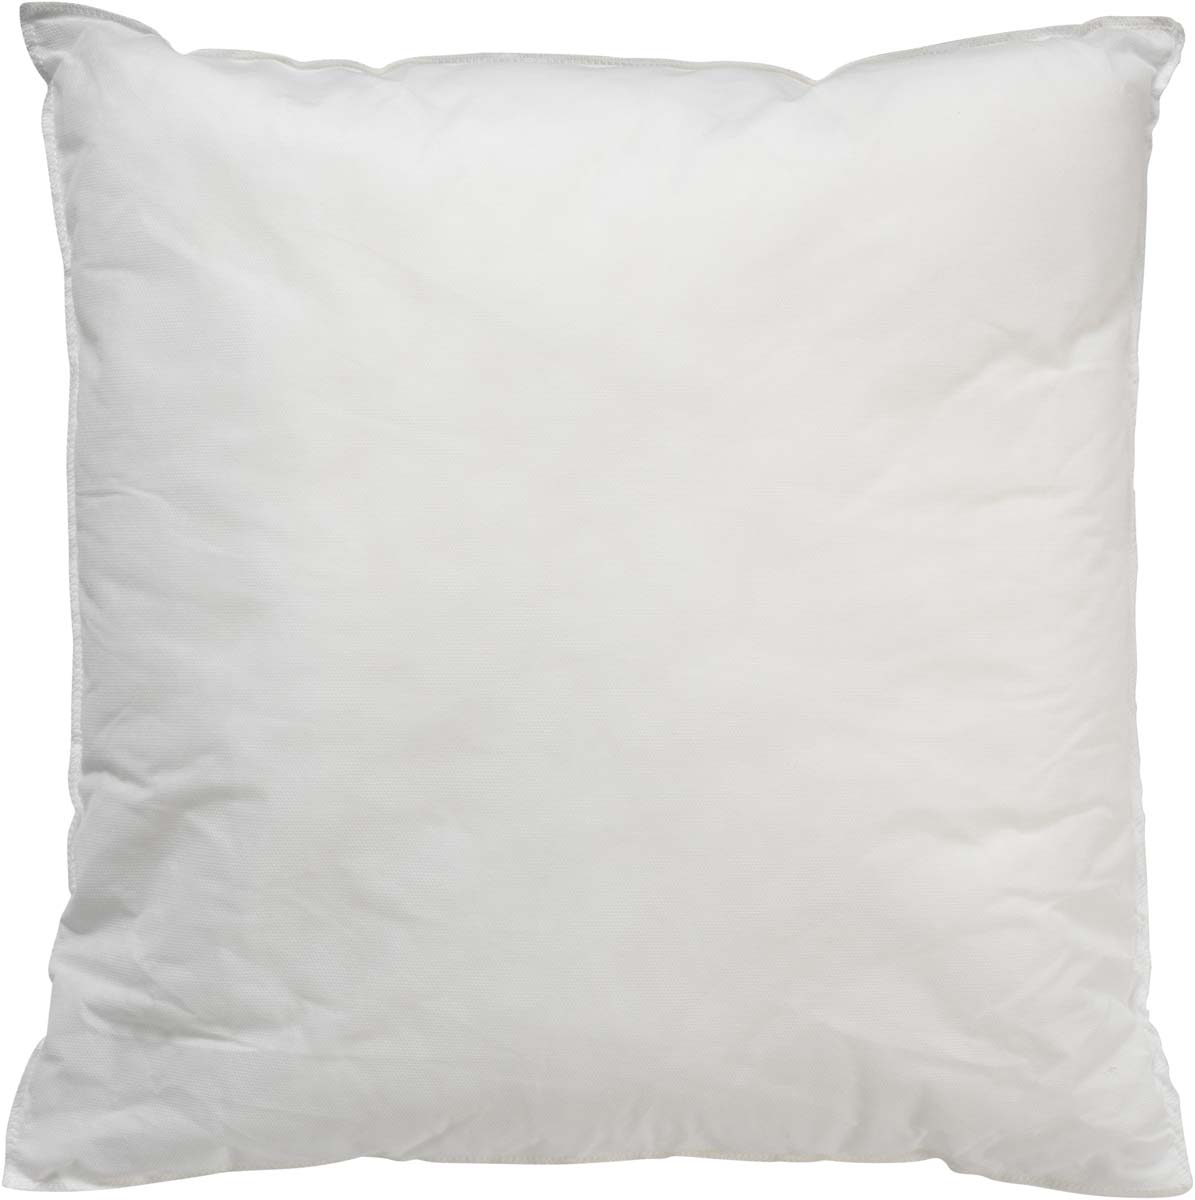 Inner cushion 50x50 cm With polyester filling